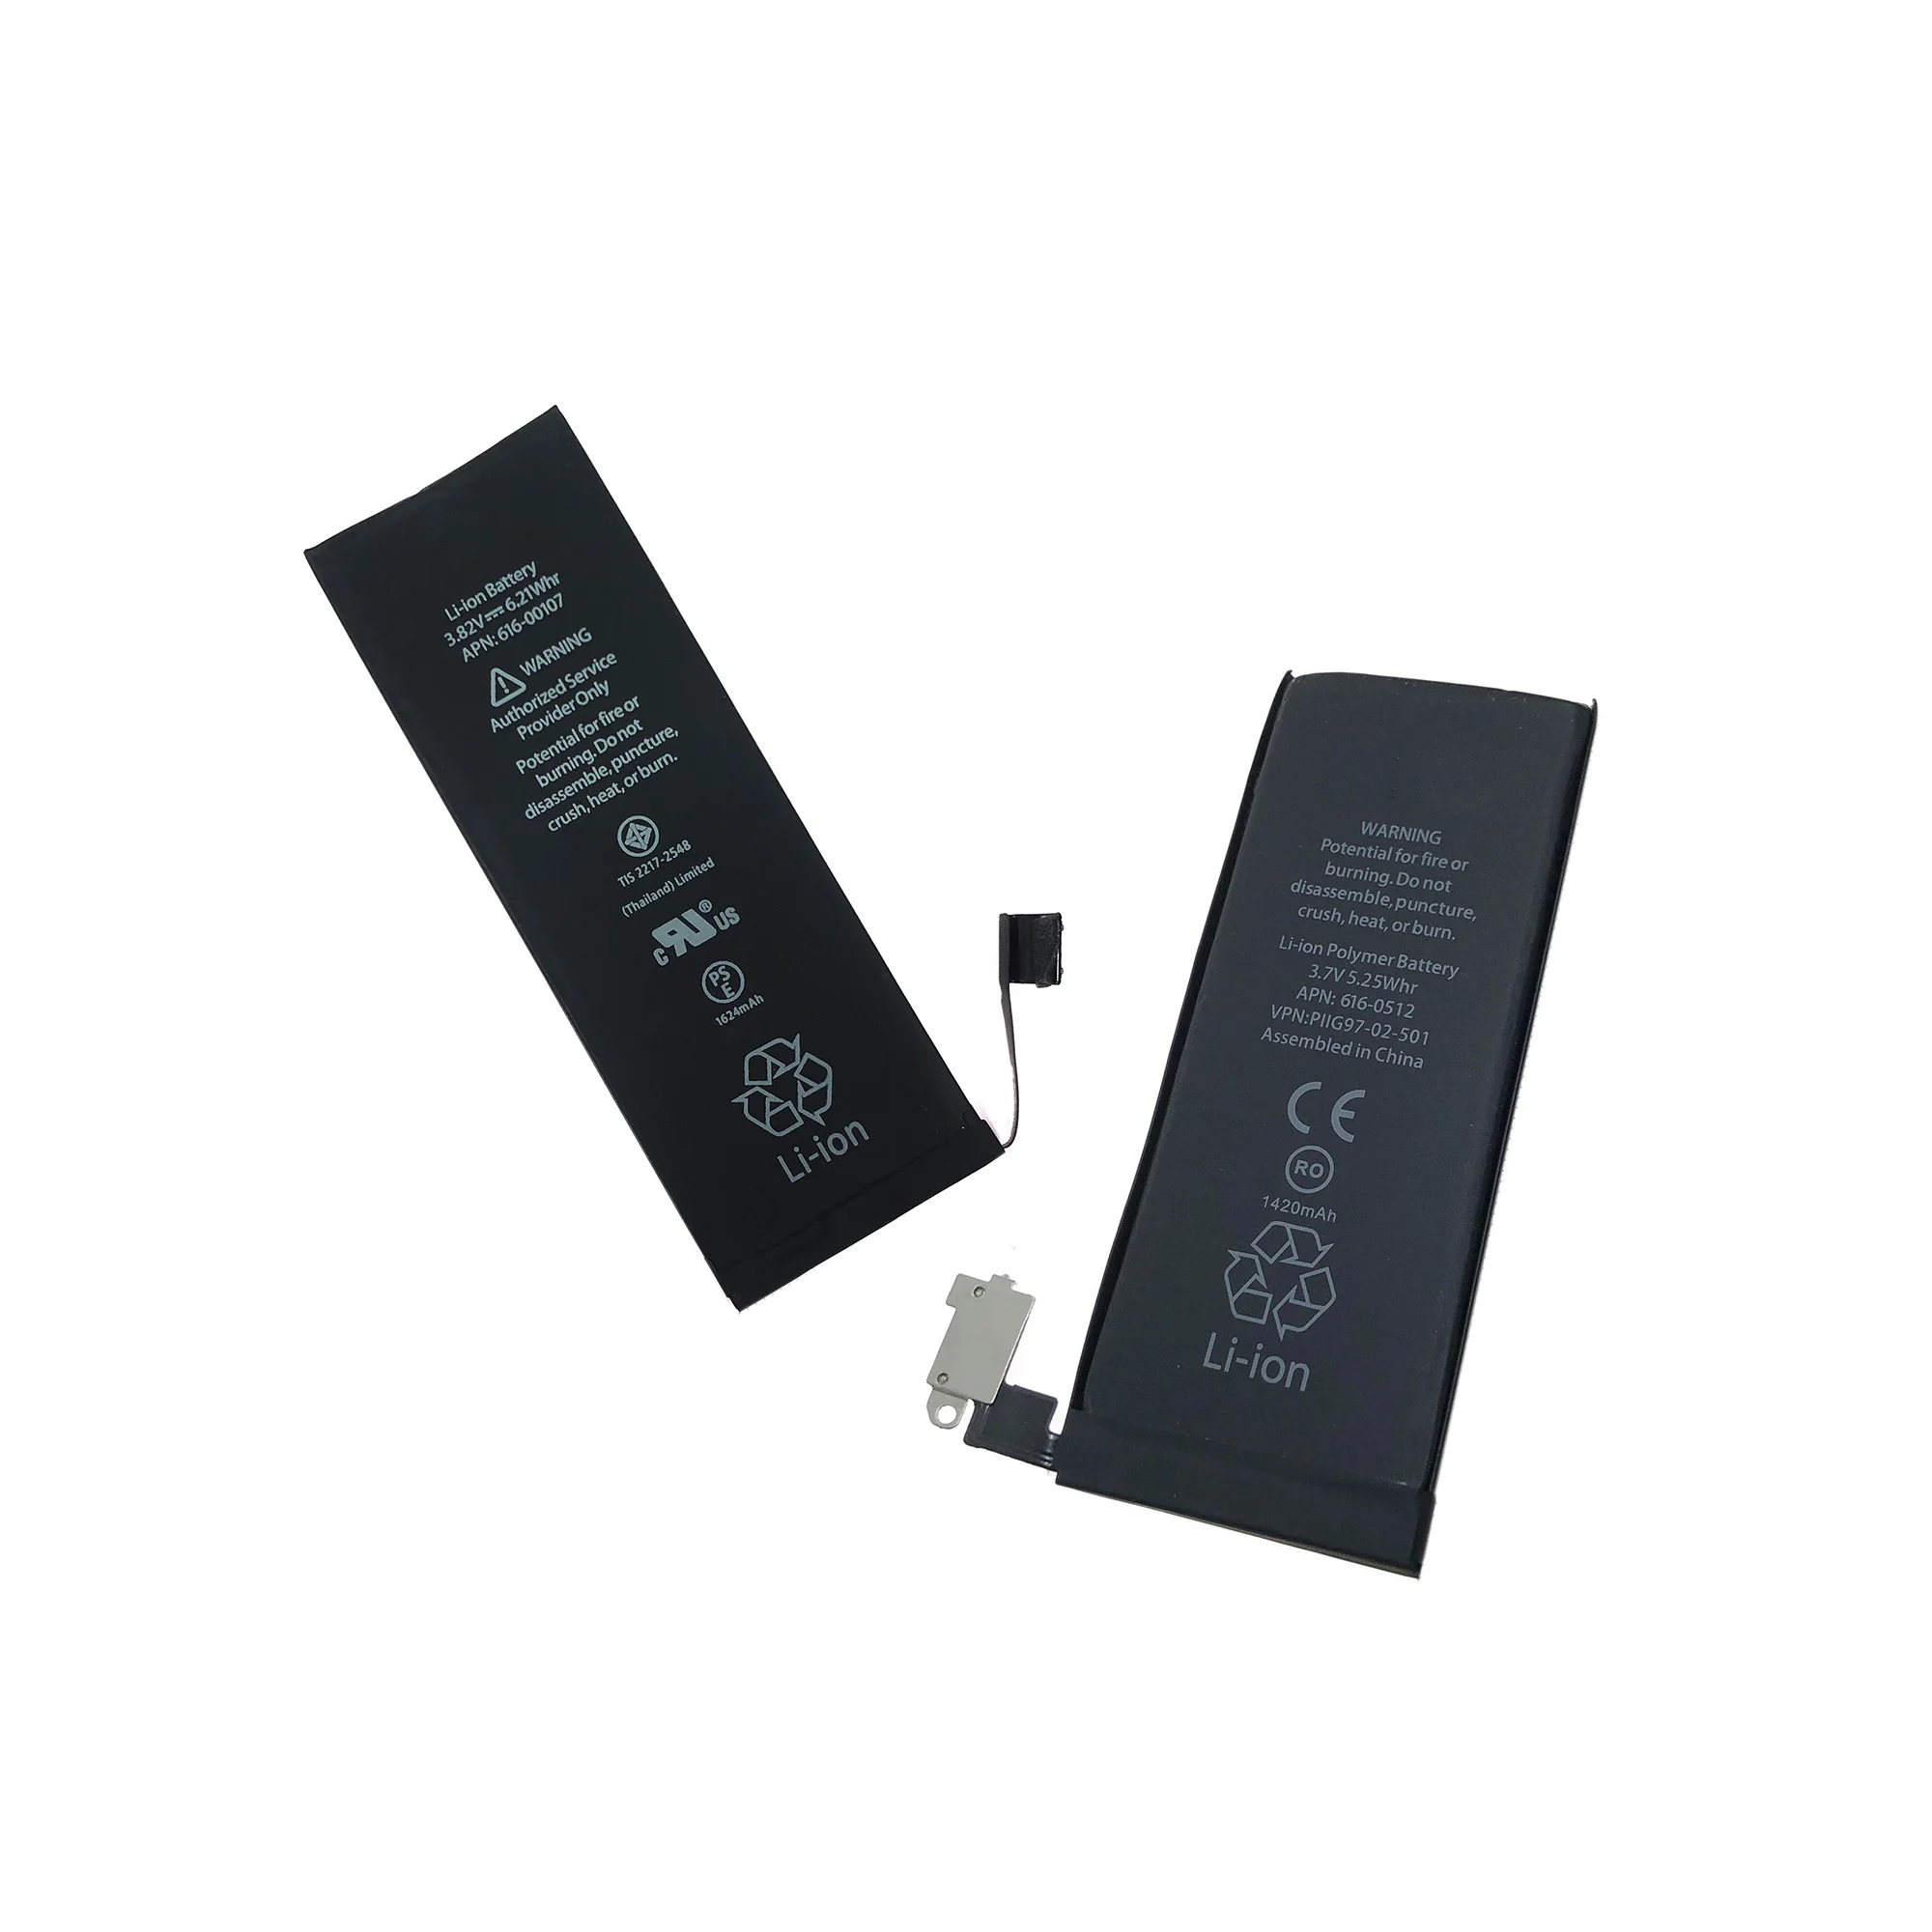 

Phone Battery For iPhone 4 5 Bateria 4S 5S replacement battery 5SE Mobile Phone Battery High Capacity 0 Cycles Polymer